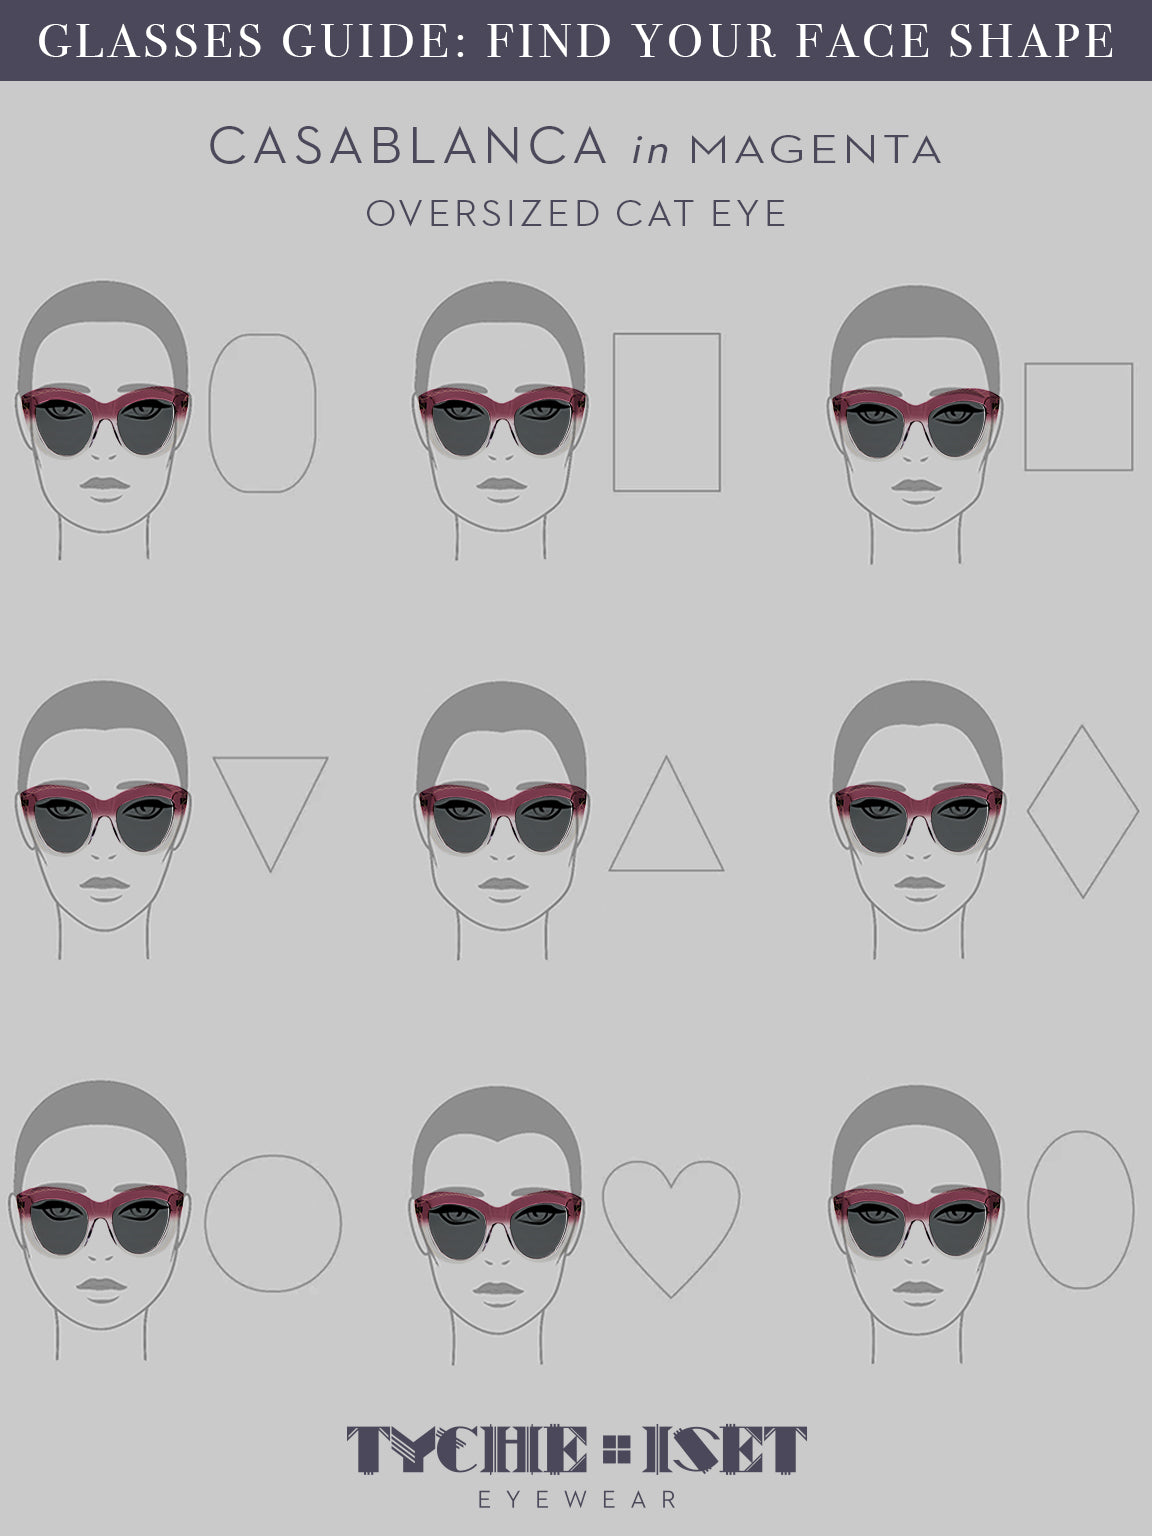 face shape guide, sunglasses face shape guide, magenta accessories, pink glasses, oversized sunglasses, woman-owned business, designer eyewear, luxury sunglasses, cat eye glasses, celebrity style